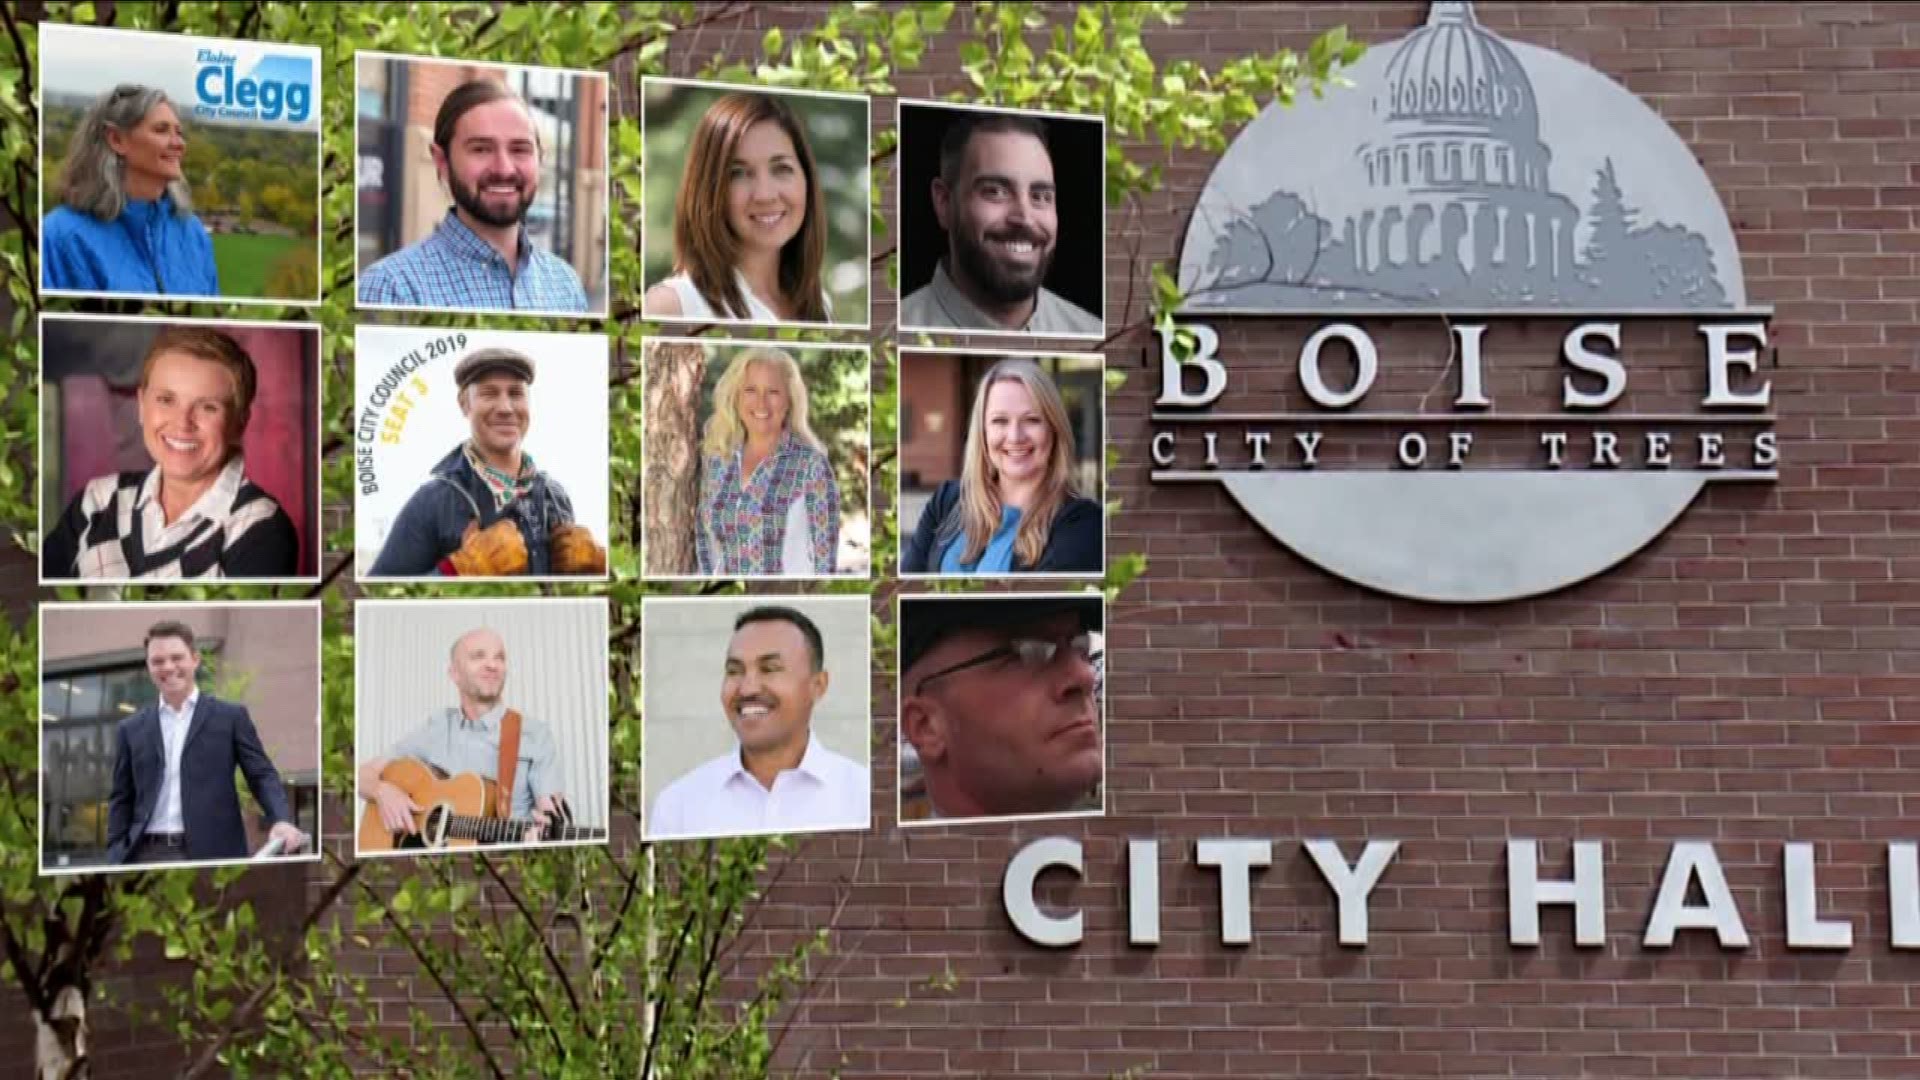 The race for the 2019 Boise mayor and City Council seats started on Monday with candidates officially filing for candidates. It's already a crowded race for the three City Council seats with 12 candidates already.